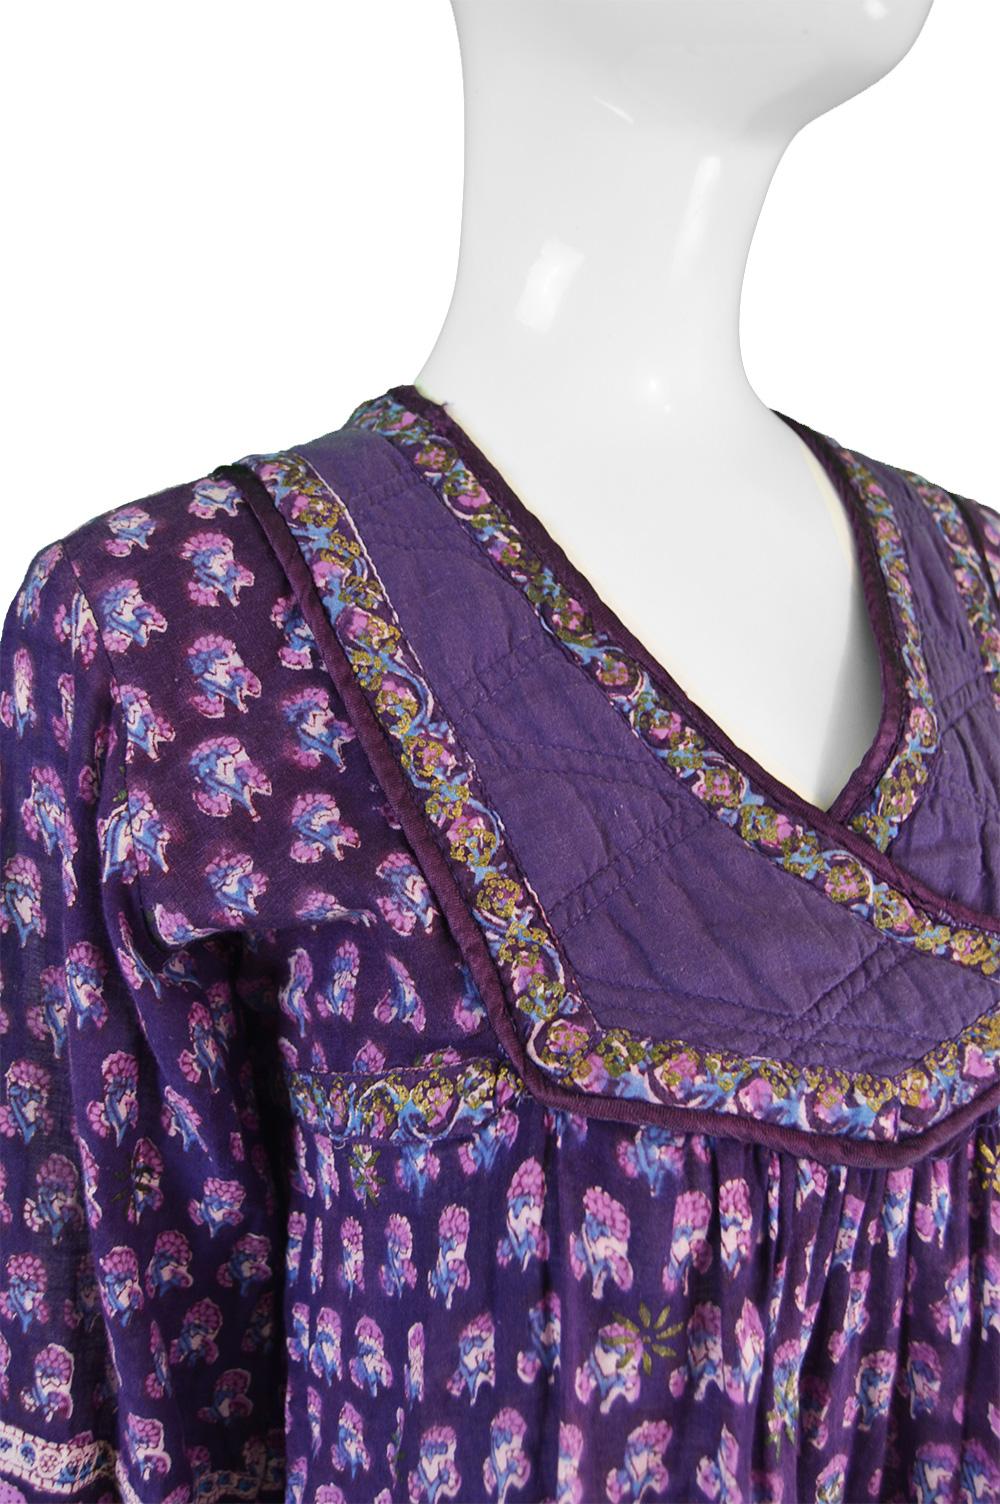 Alpnani Purple Indian Cotton Gauze Block Printed Quilted Boho Dress, 1970s In Excellent Condition For Sale In Doncaster, South Yorkshire